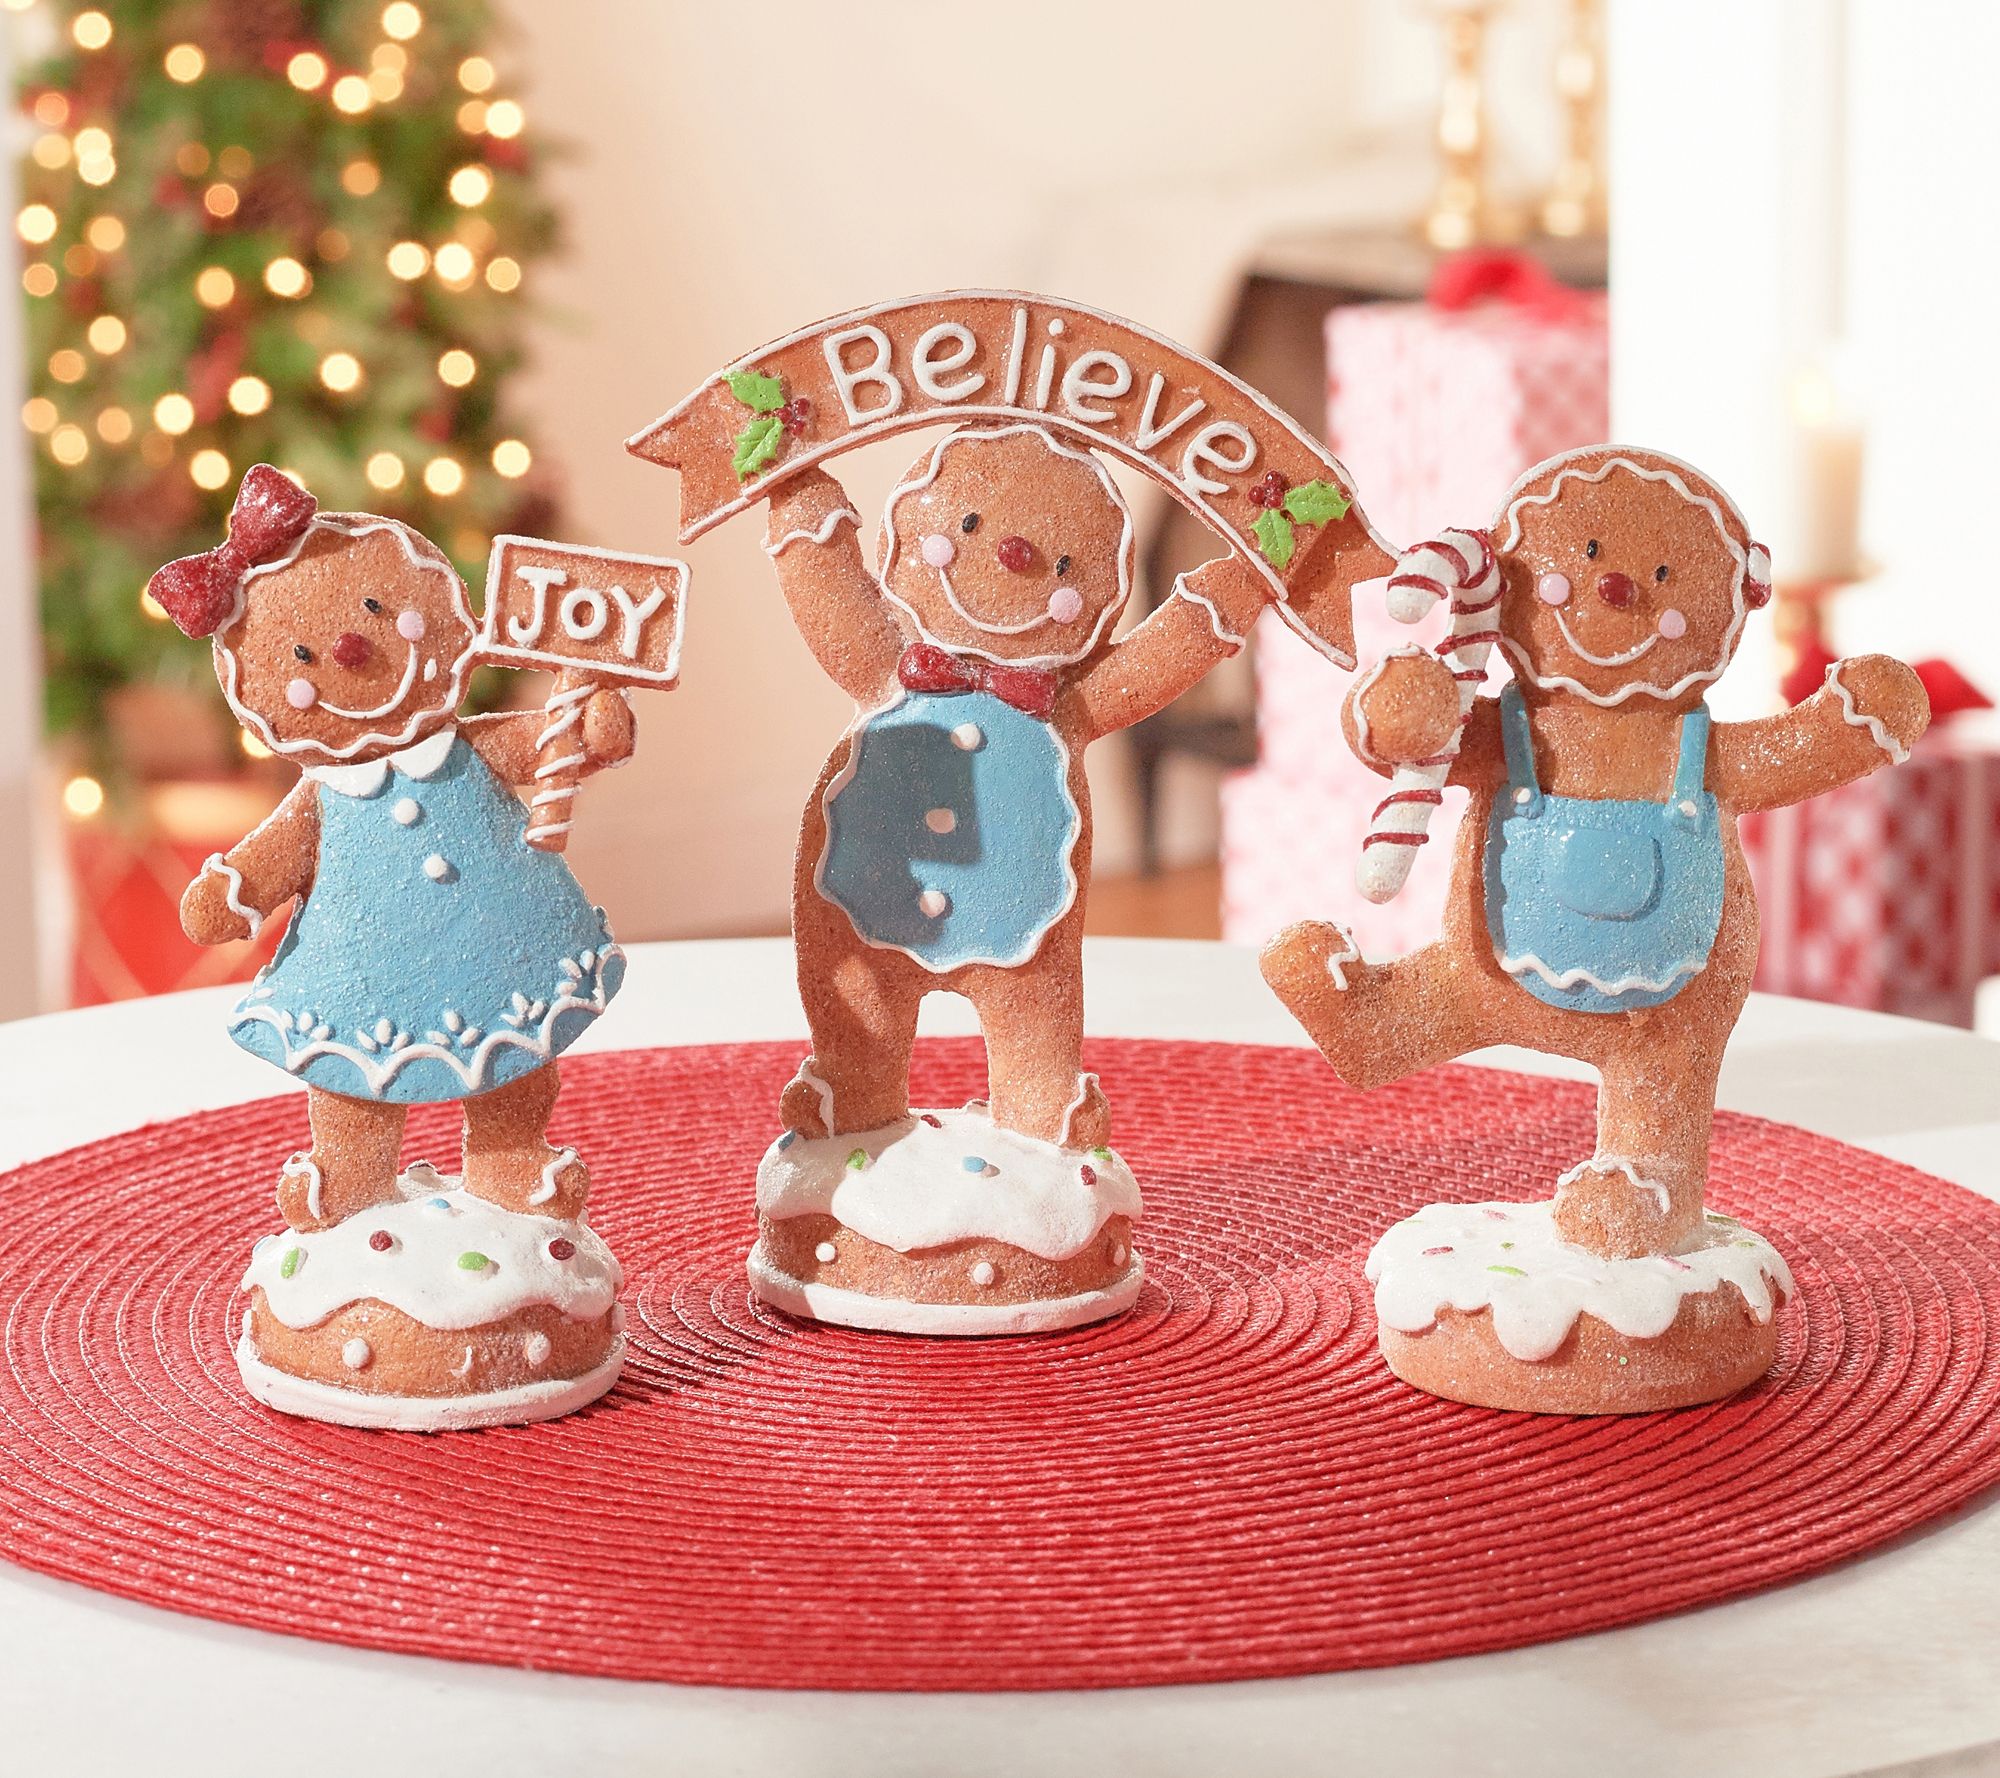 Set of 3 Gingerbread Friends with Messages by Valerie - QVC.com